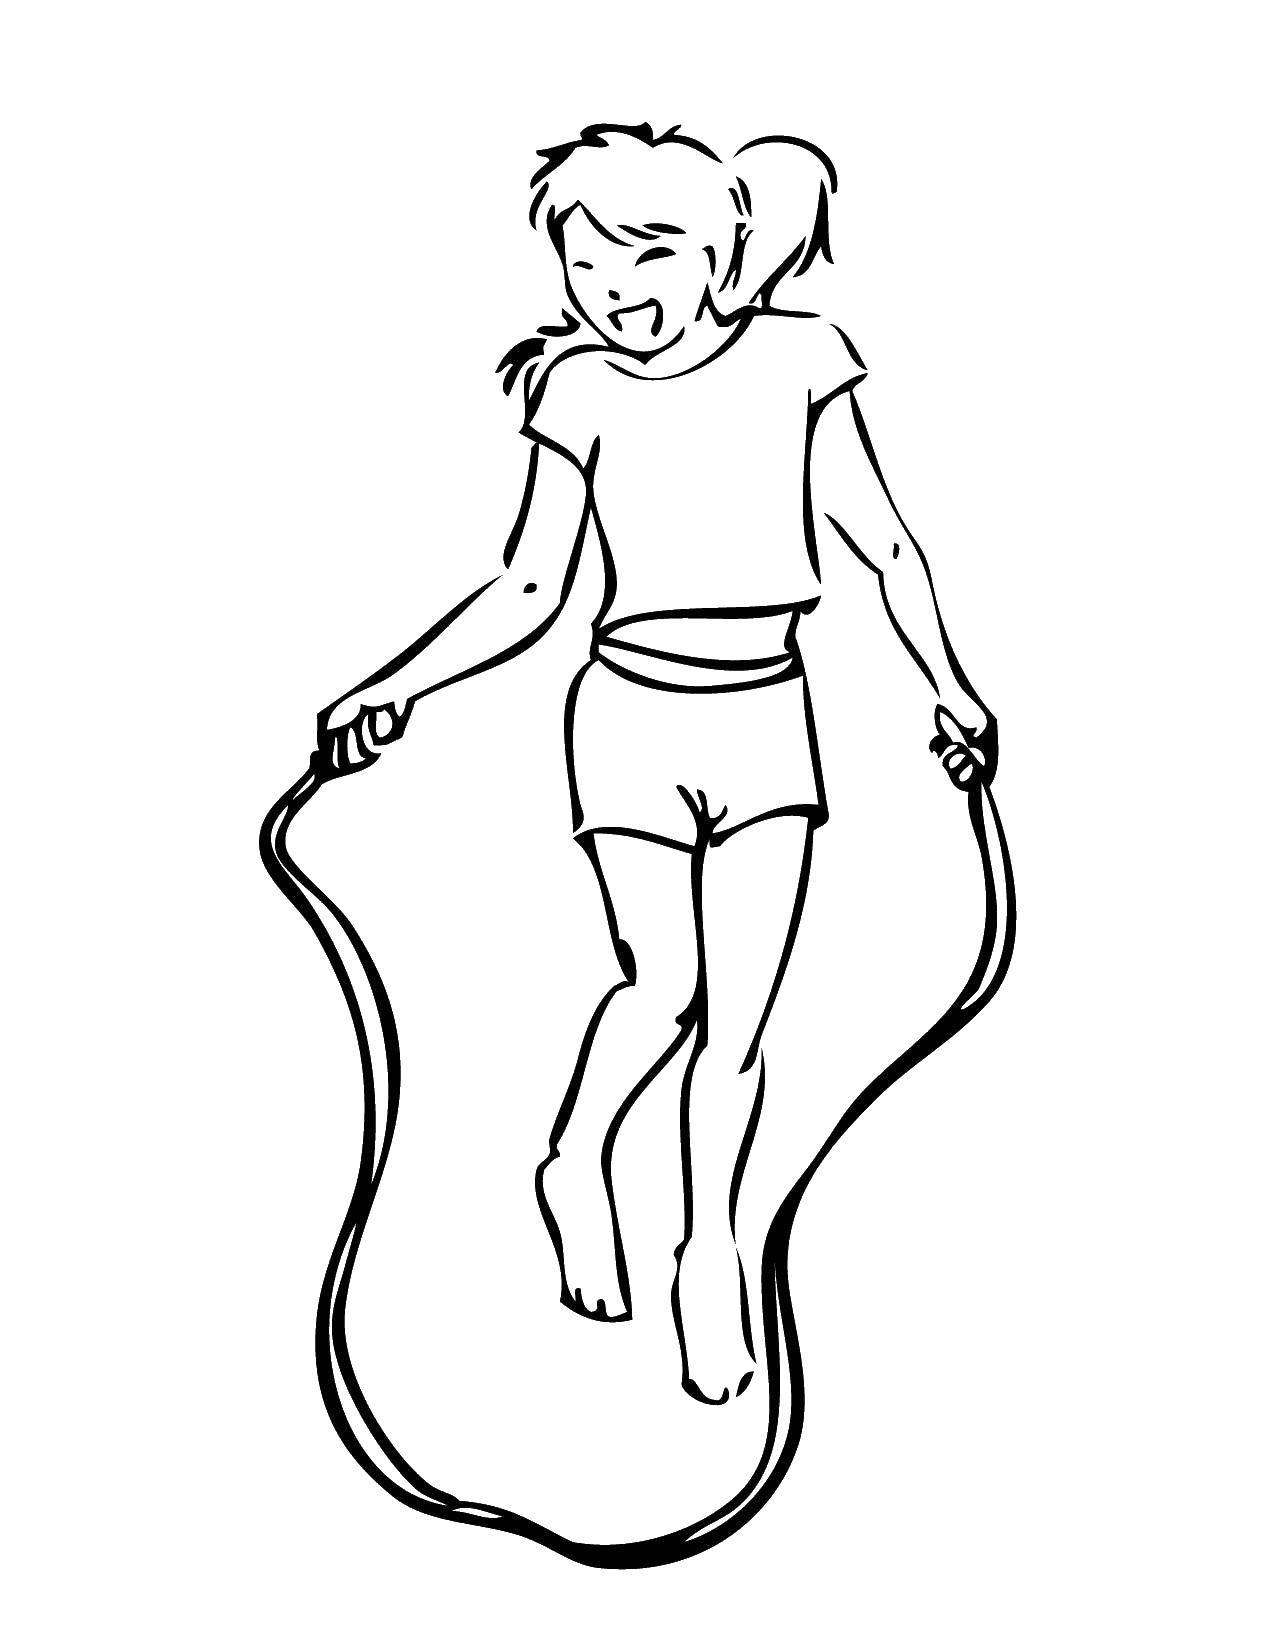 Coloring To jump very fun. Category The jump. Tags:  Sports, jump rope.